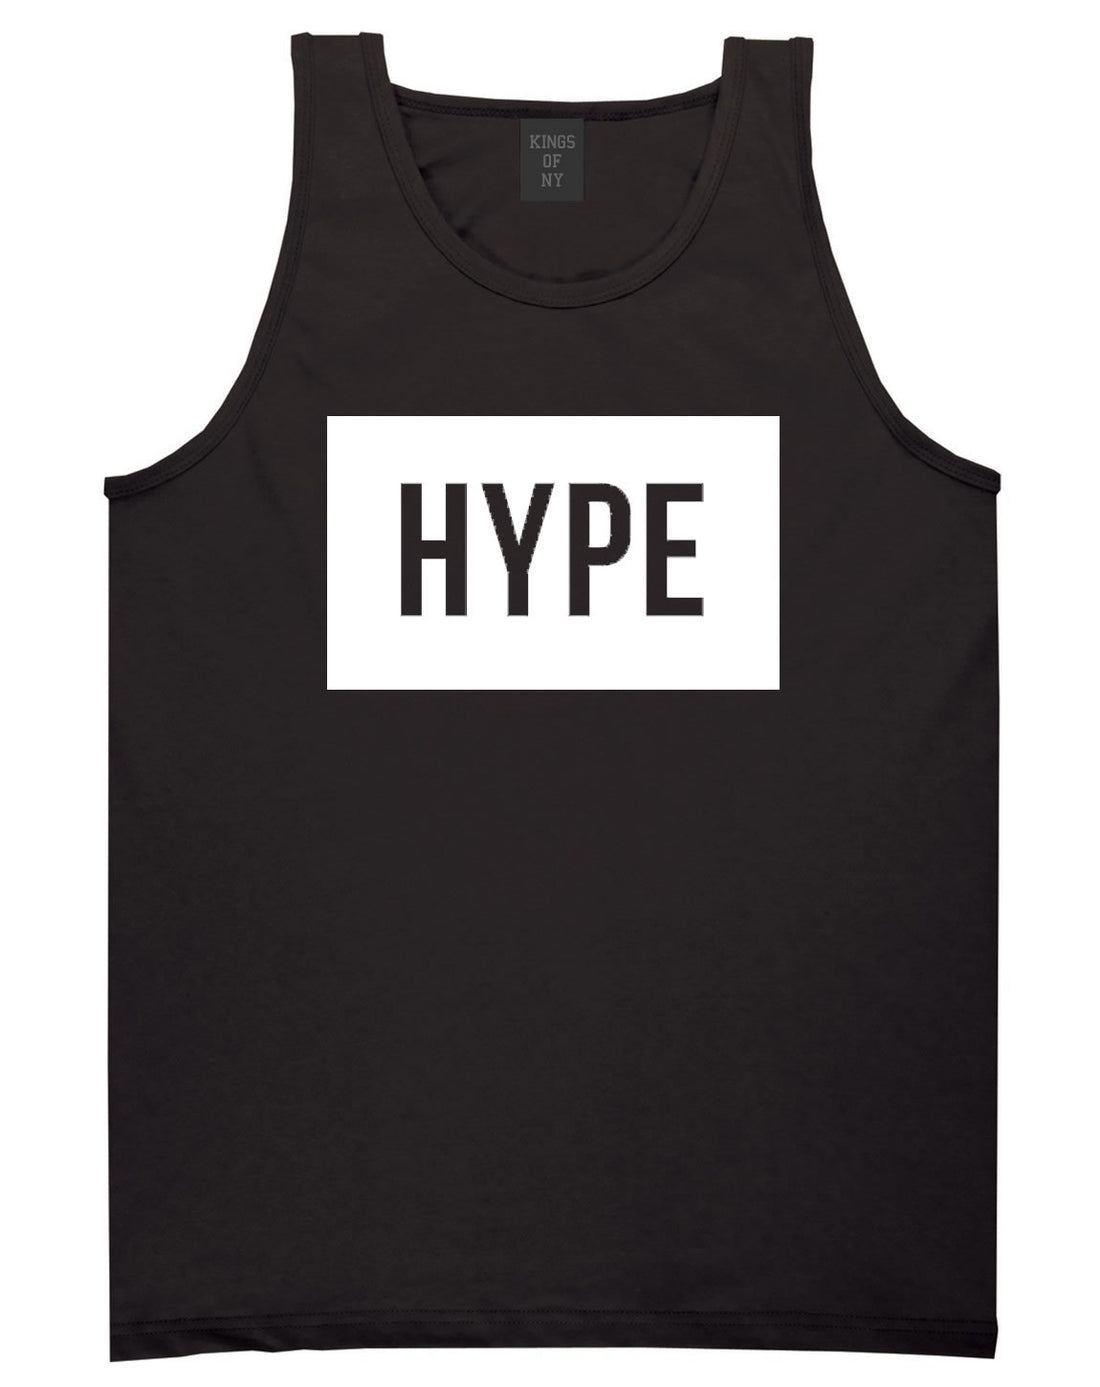 Hype Style Streetwear Brand Logo White by Kings Of NY Tank Top In Black by Kings Of NY